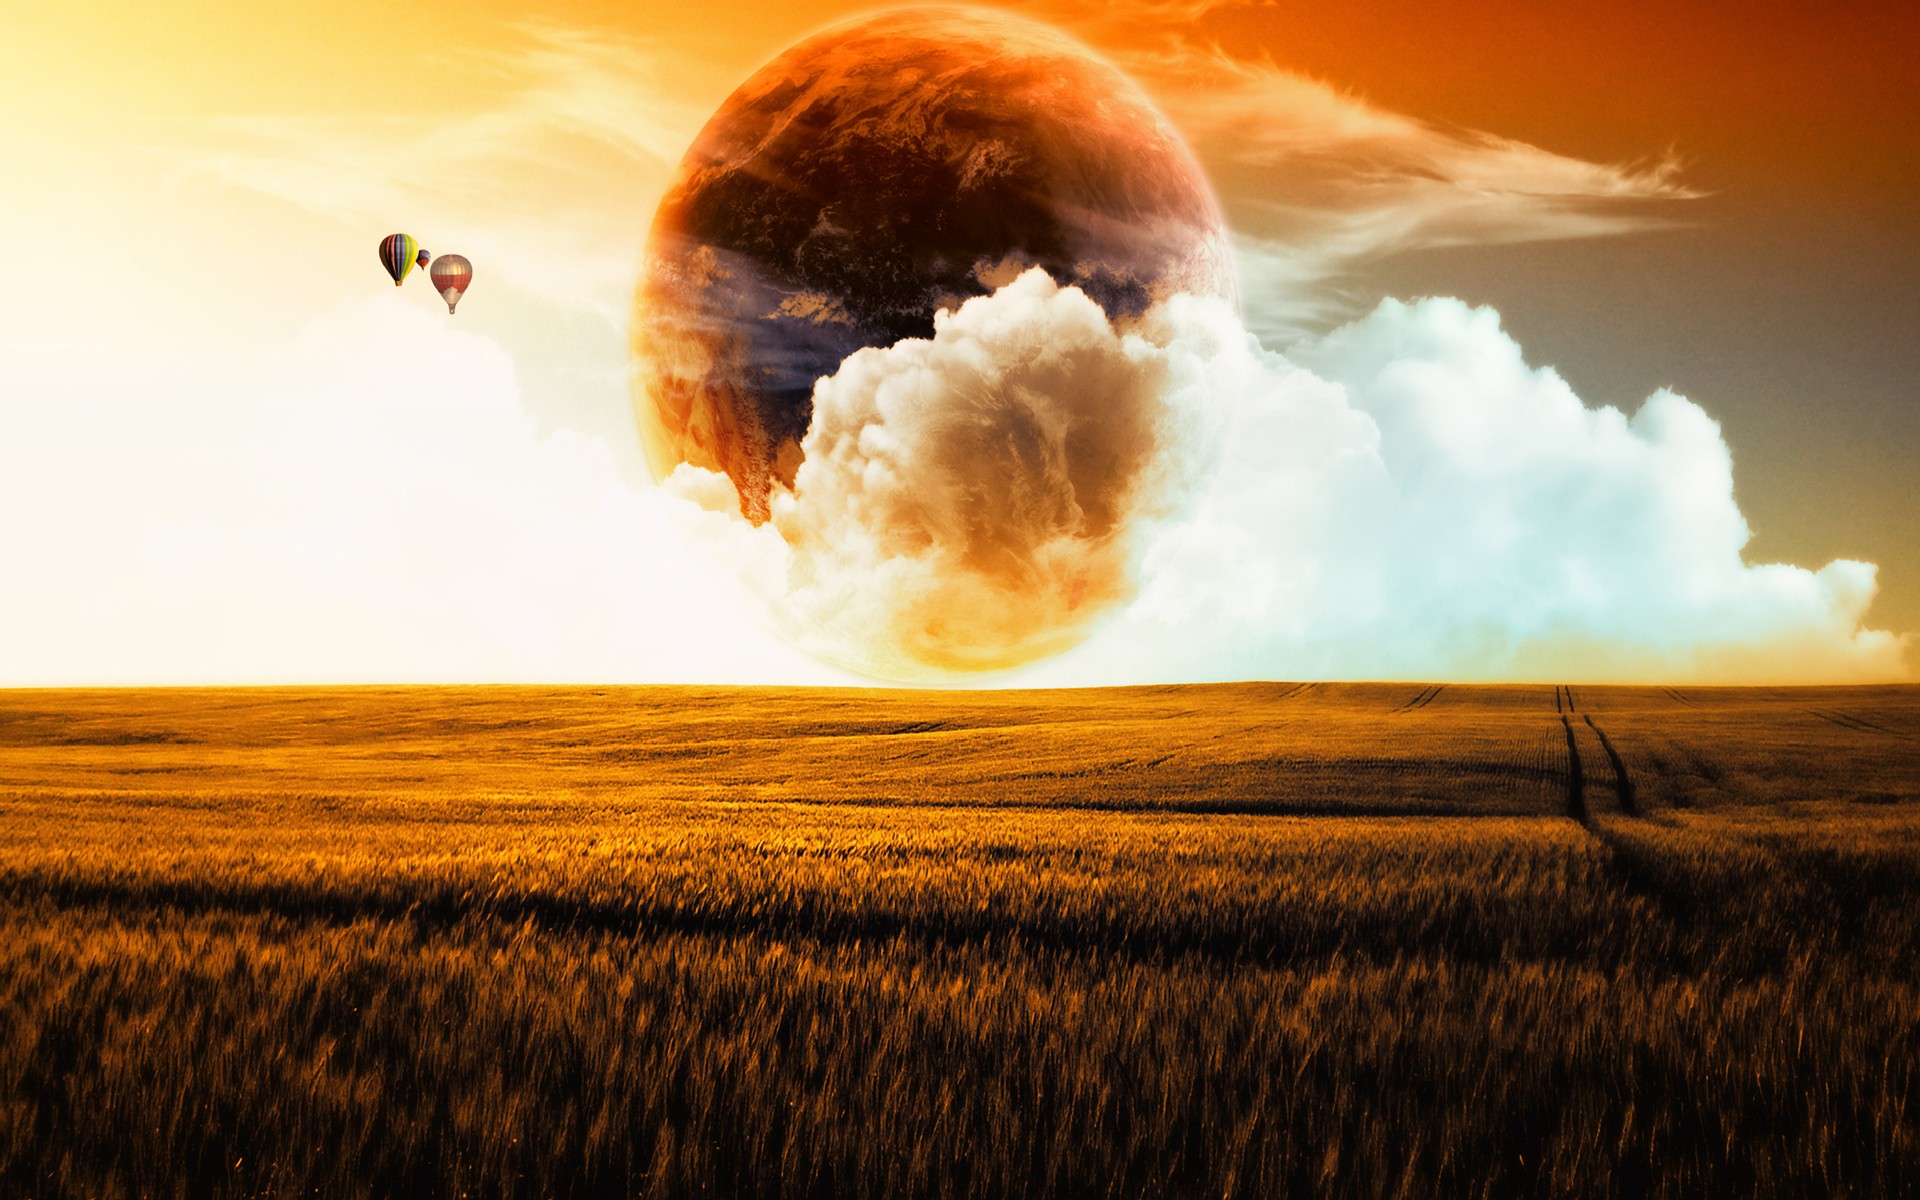 landscapes, Planets, Fields, Balloons Wallpaper